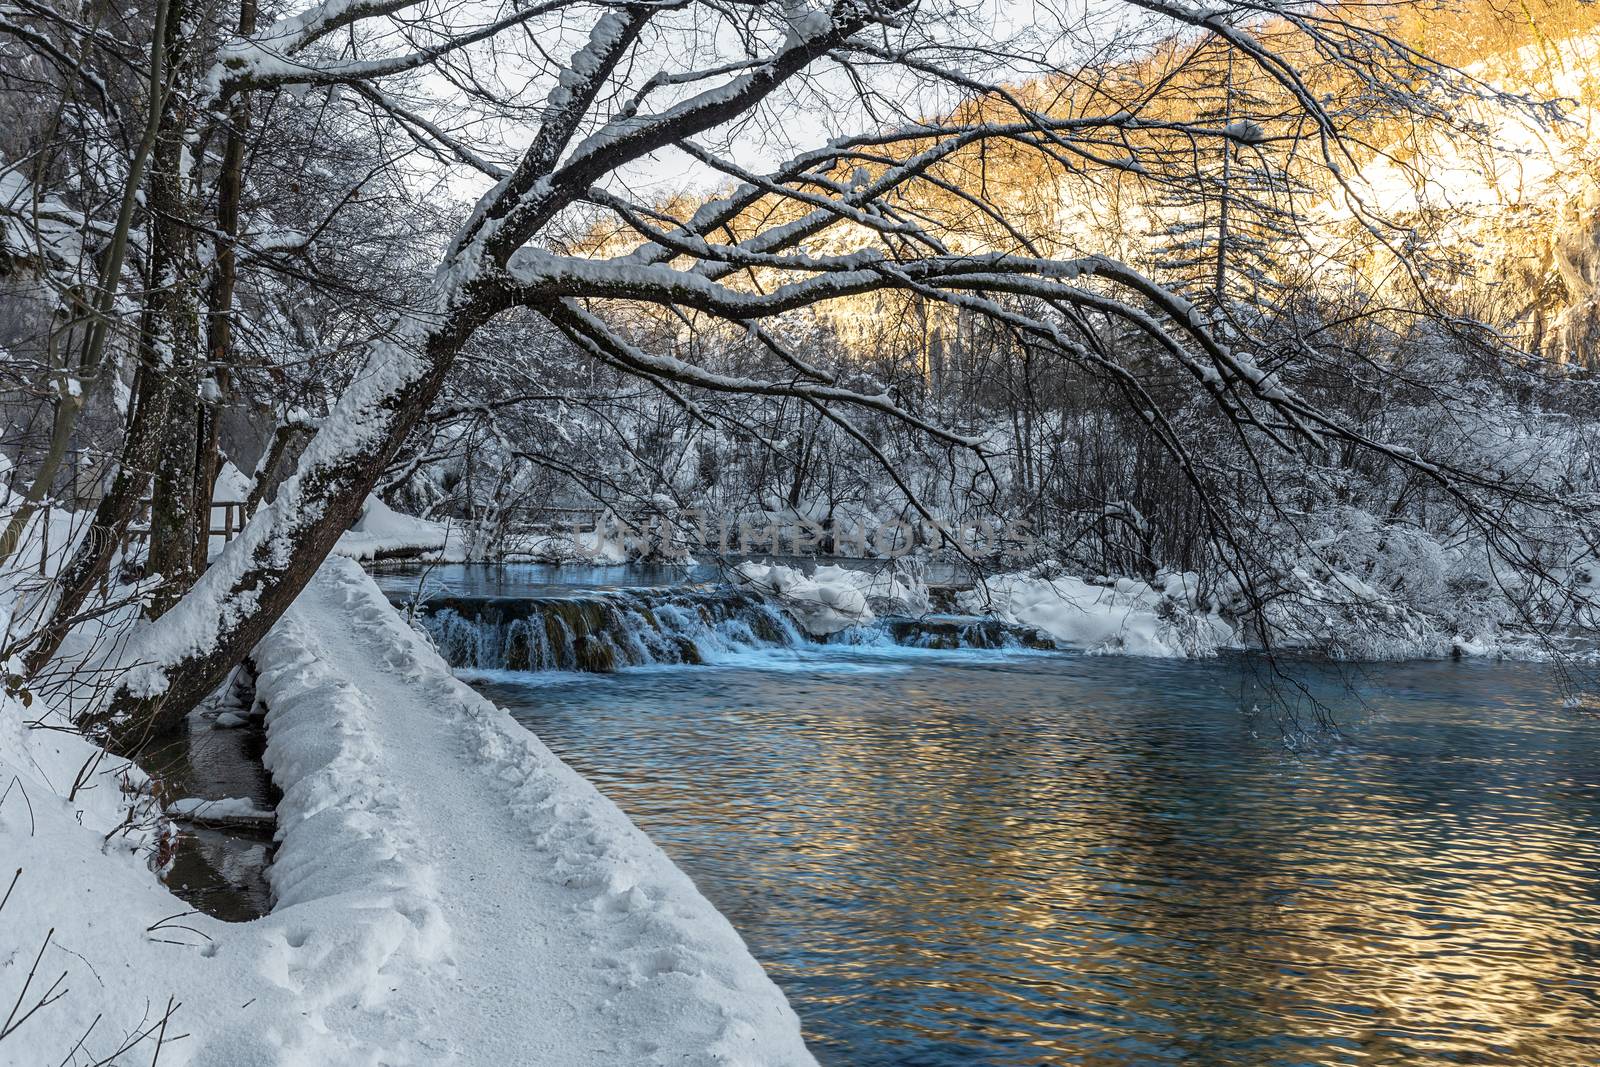 Plitvice lakes during winter with high level of snow by necro79